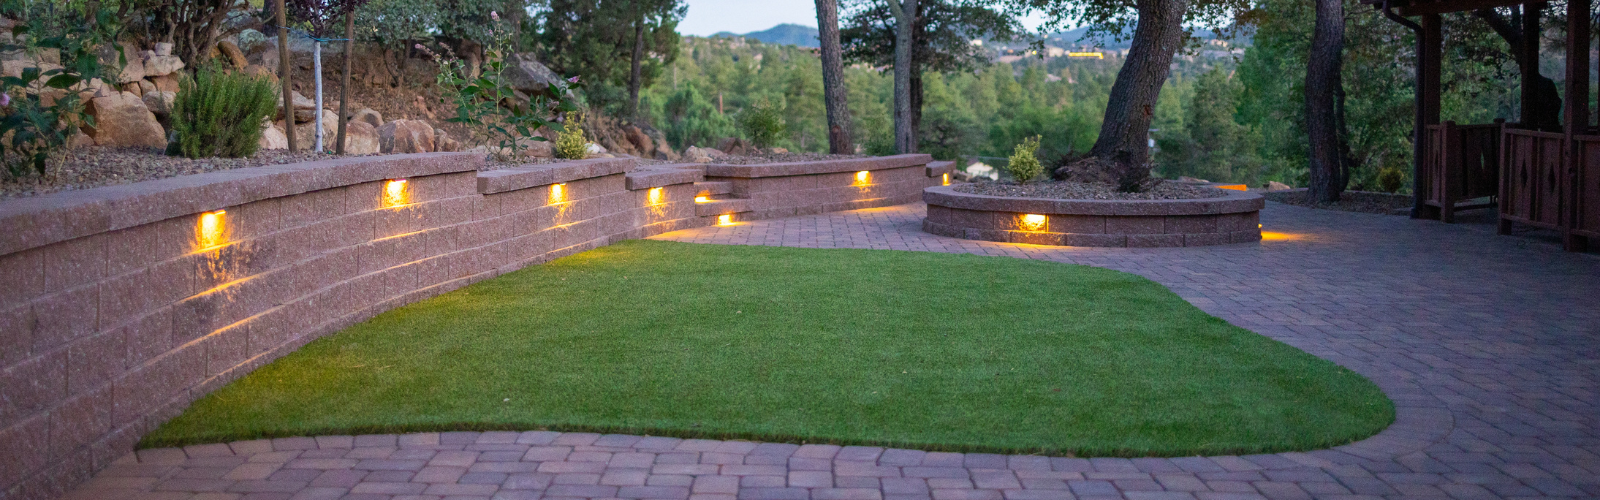 A backyard featuring a curved brick retaining wall with built-in lights, a small grassy area, and a circular brick seating area. The area is surrounded by trees and greenery, creating a serene and picturesque outdoor environment that consistently garners rave reviews.